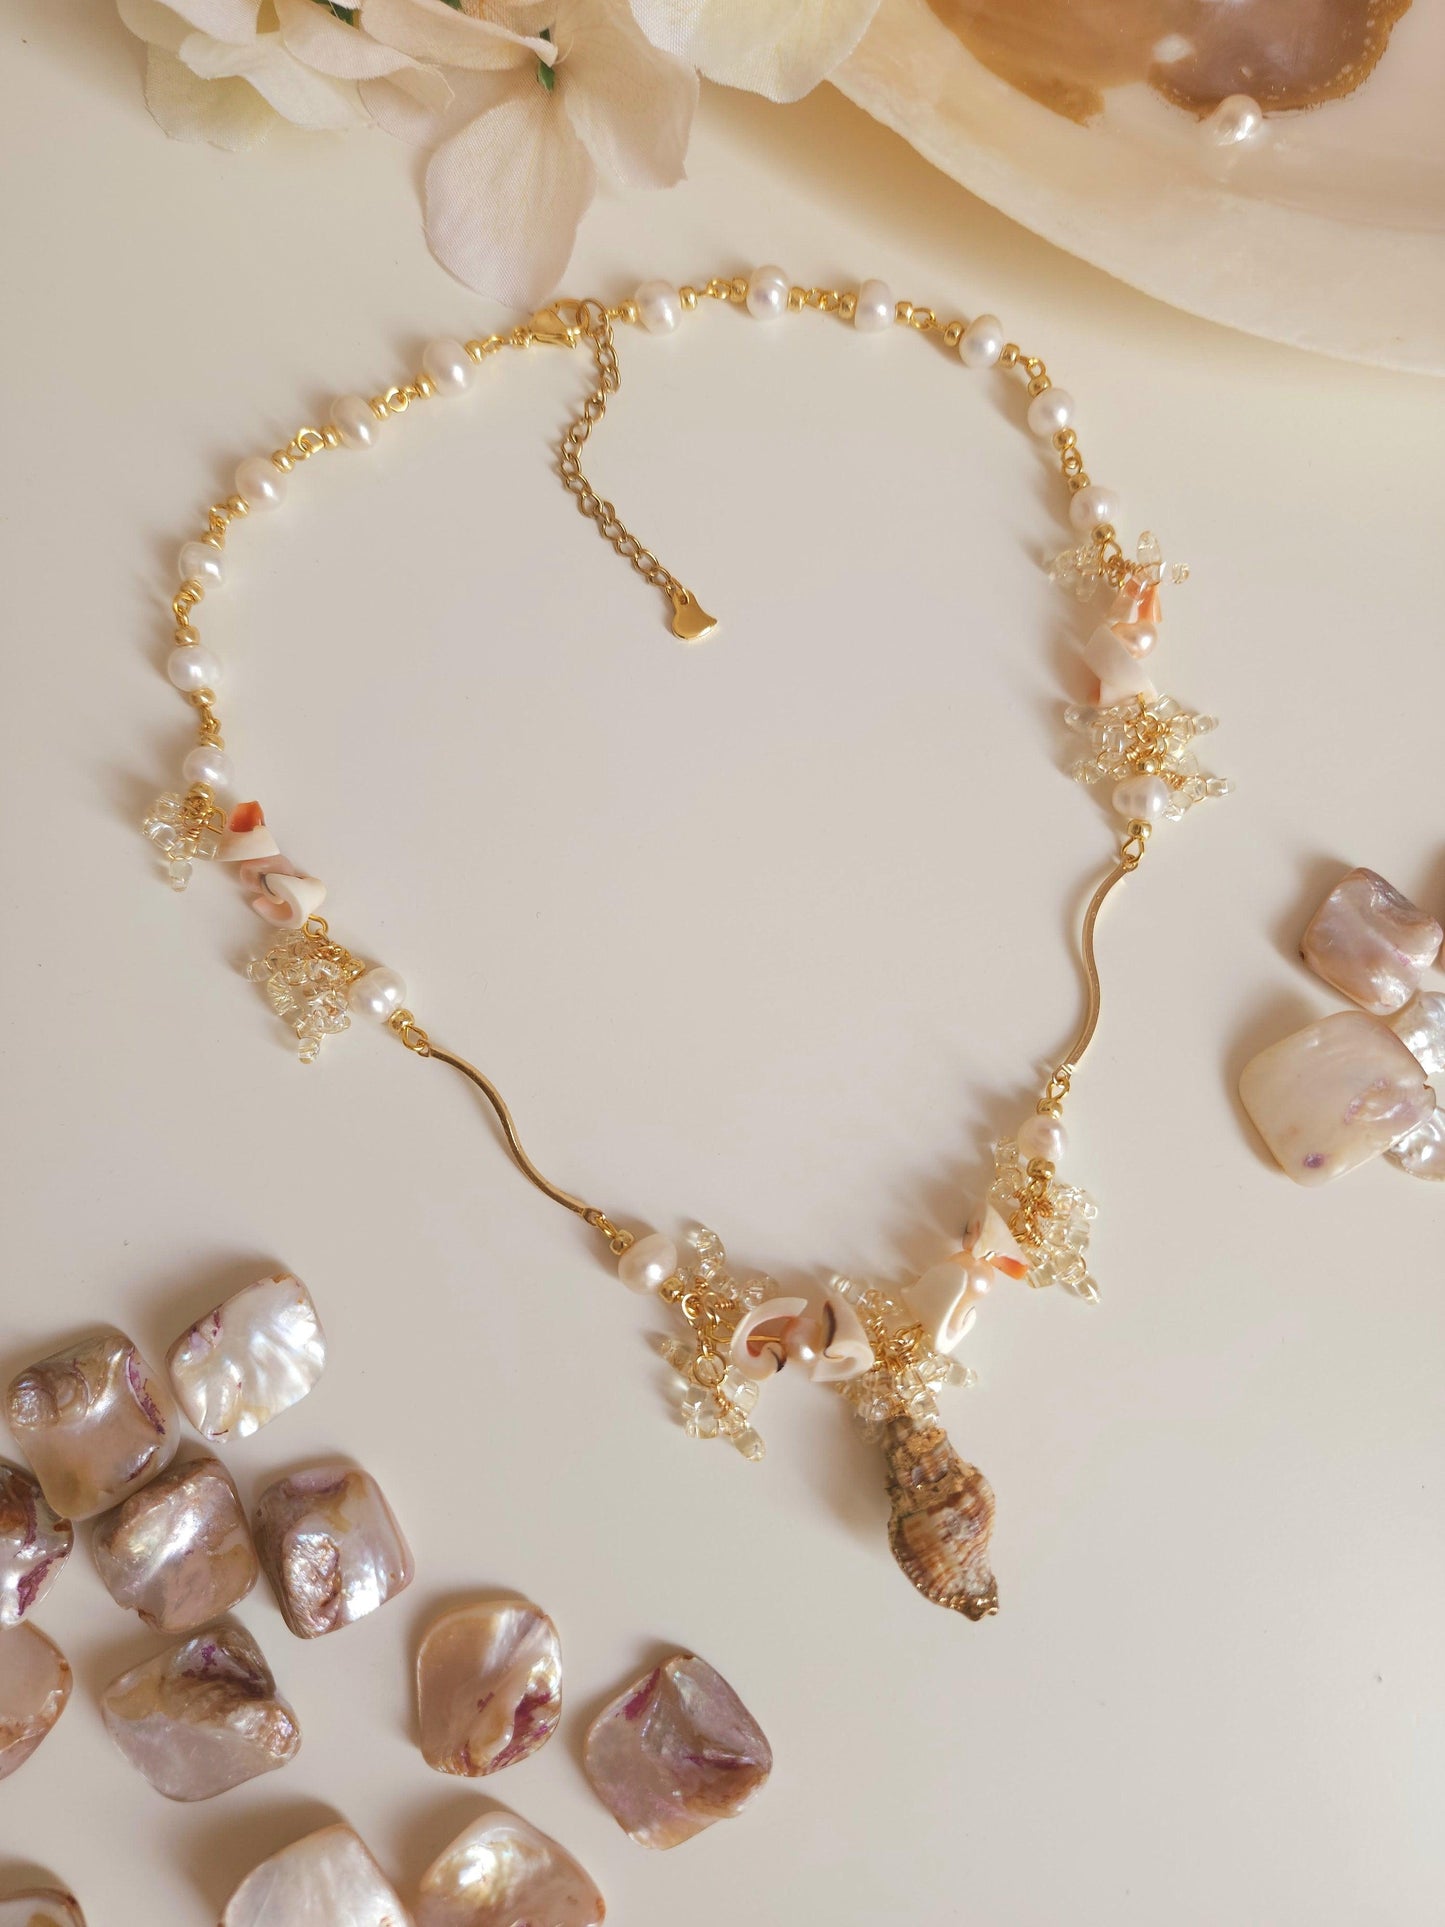 Treasure by the Coast Necklace - By Cocoyu